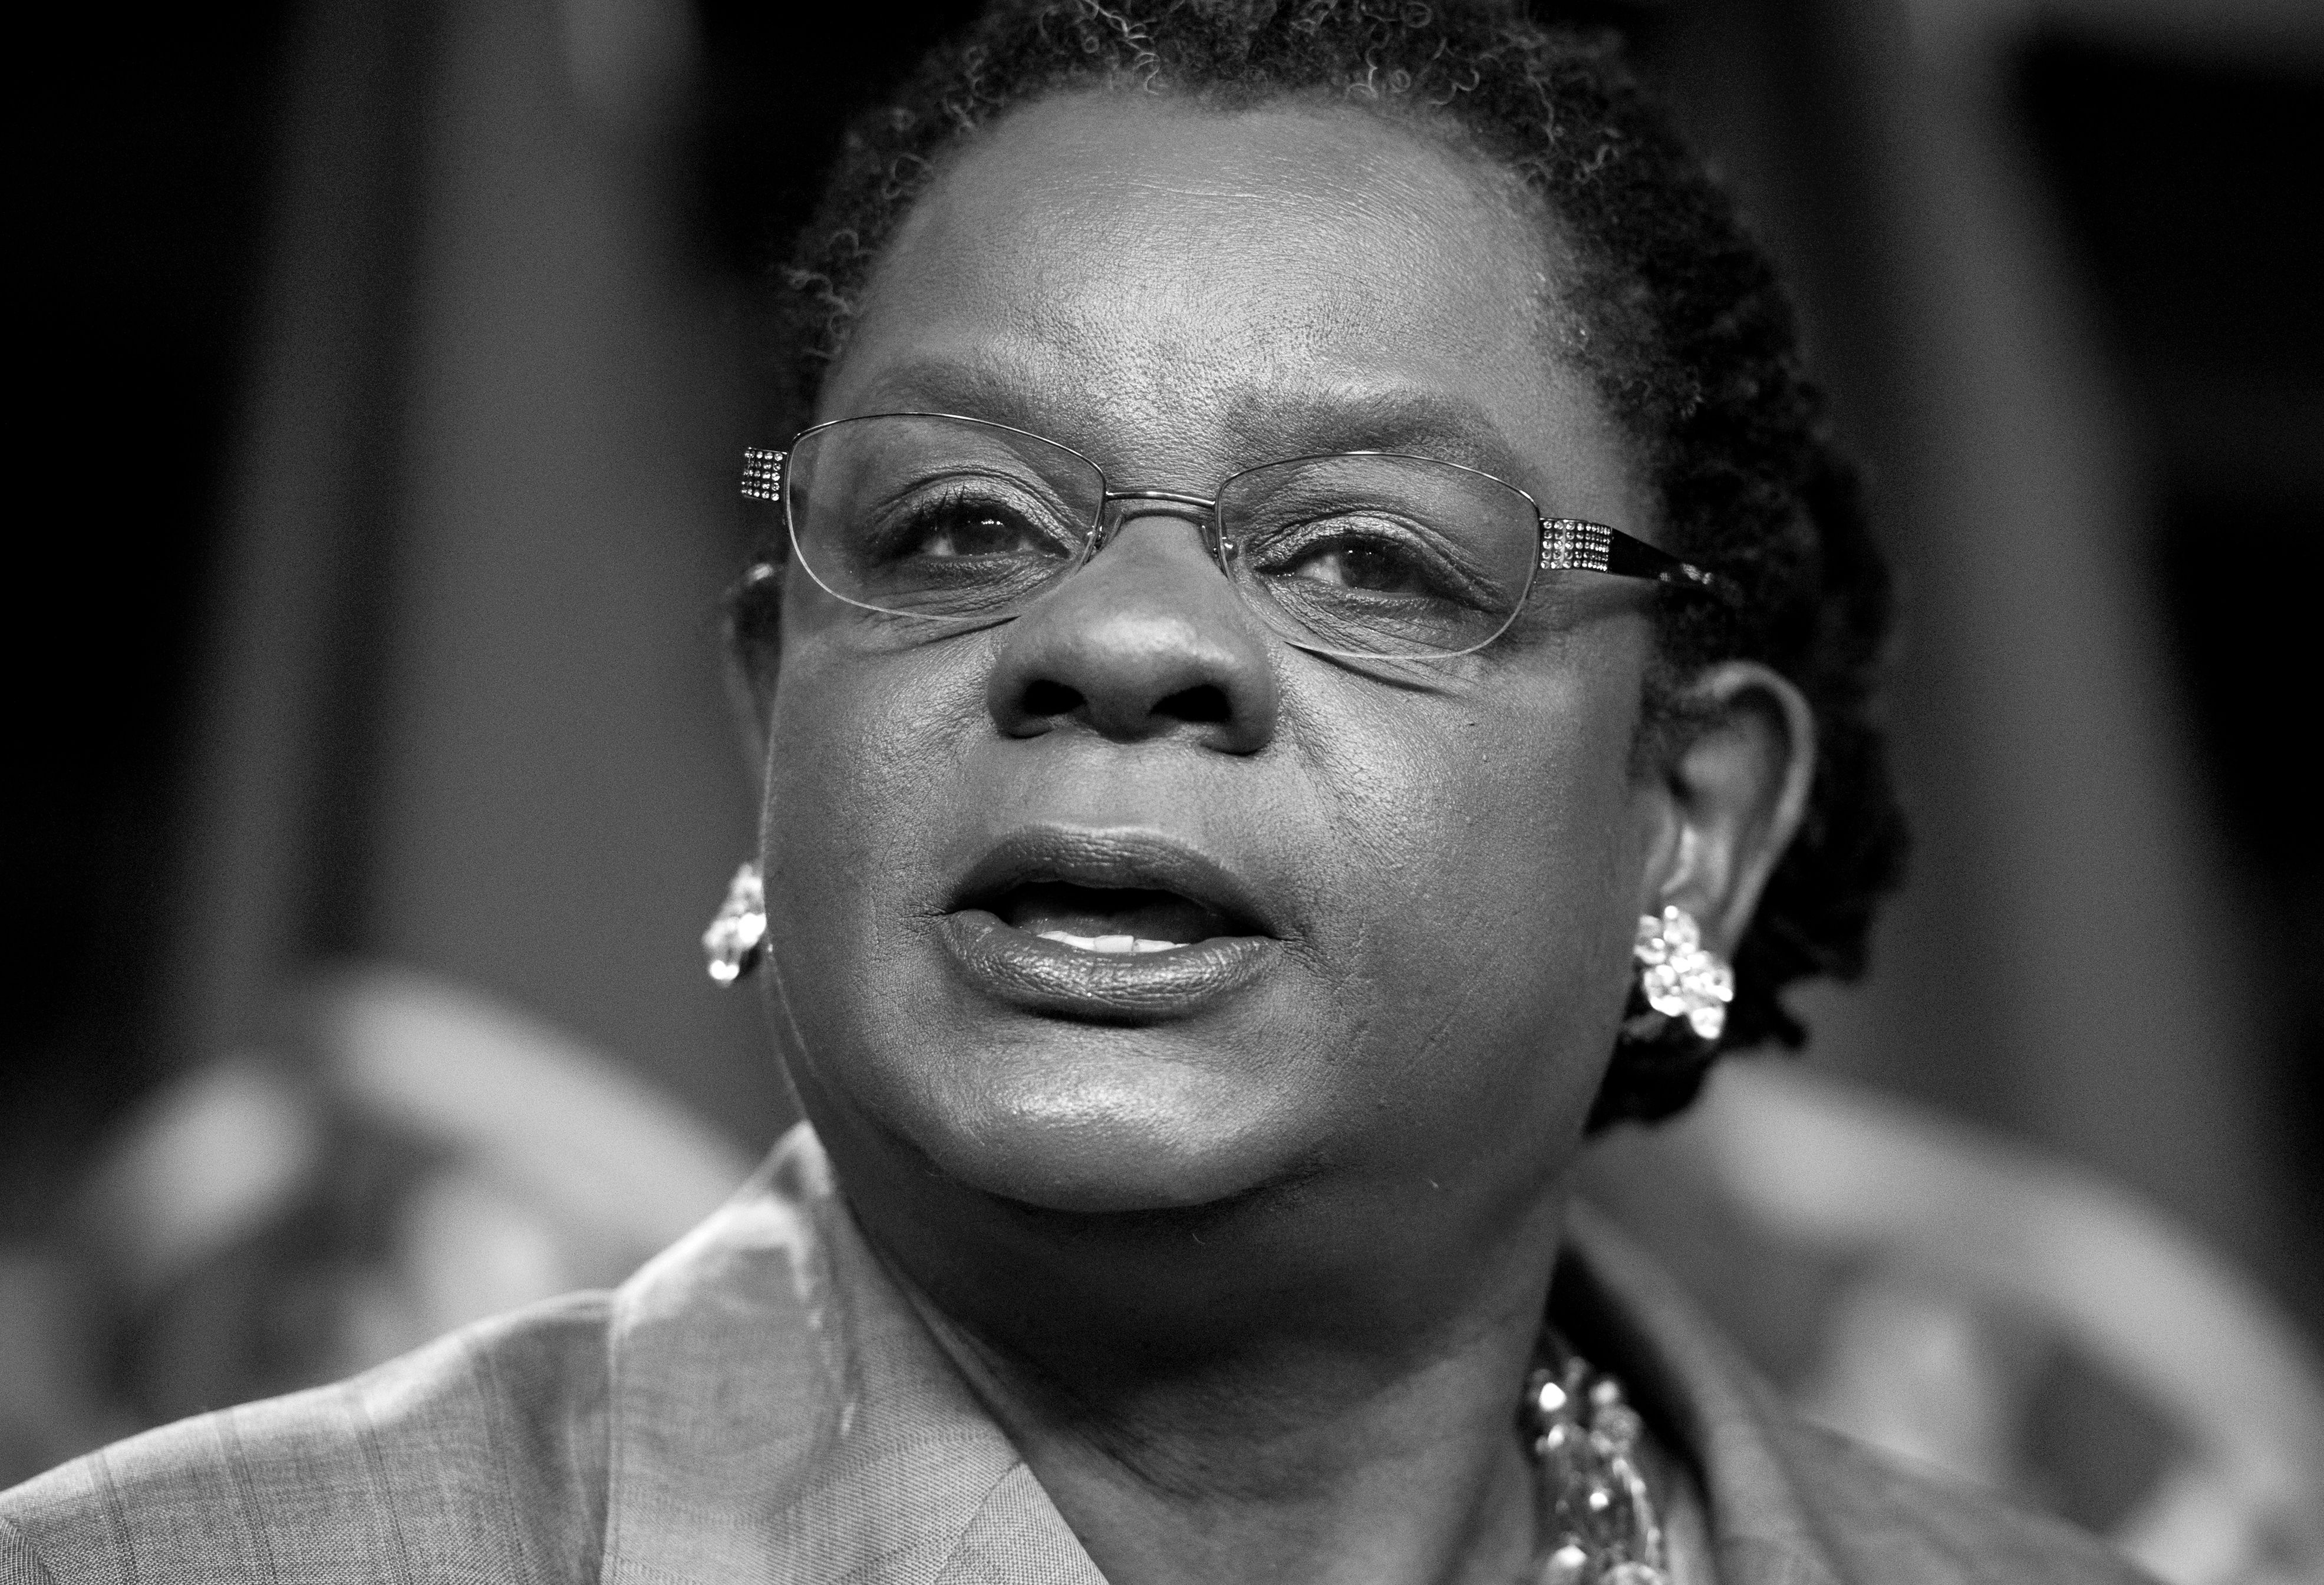 ‘I Really Needed to Reclaim My Life’: Rep. Gwen Moore Shares Her Abortion Story